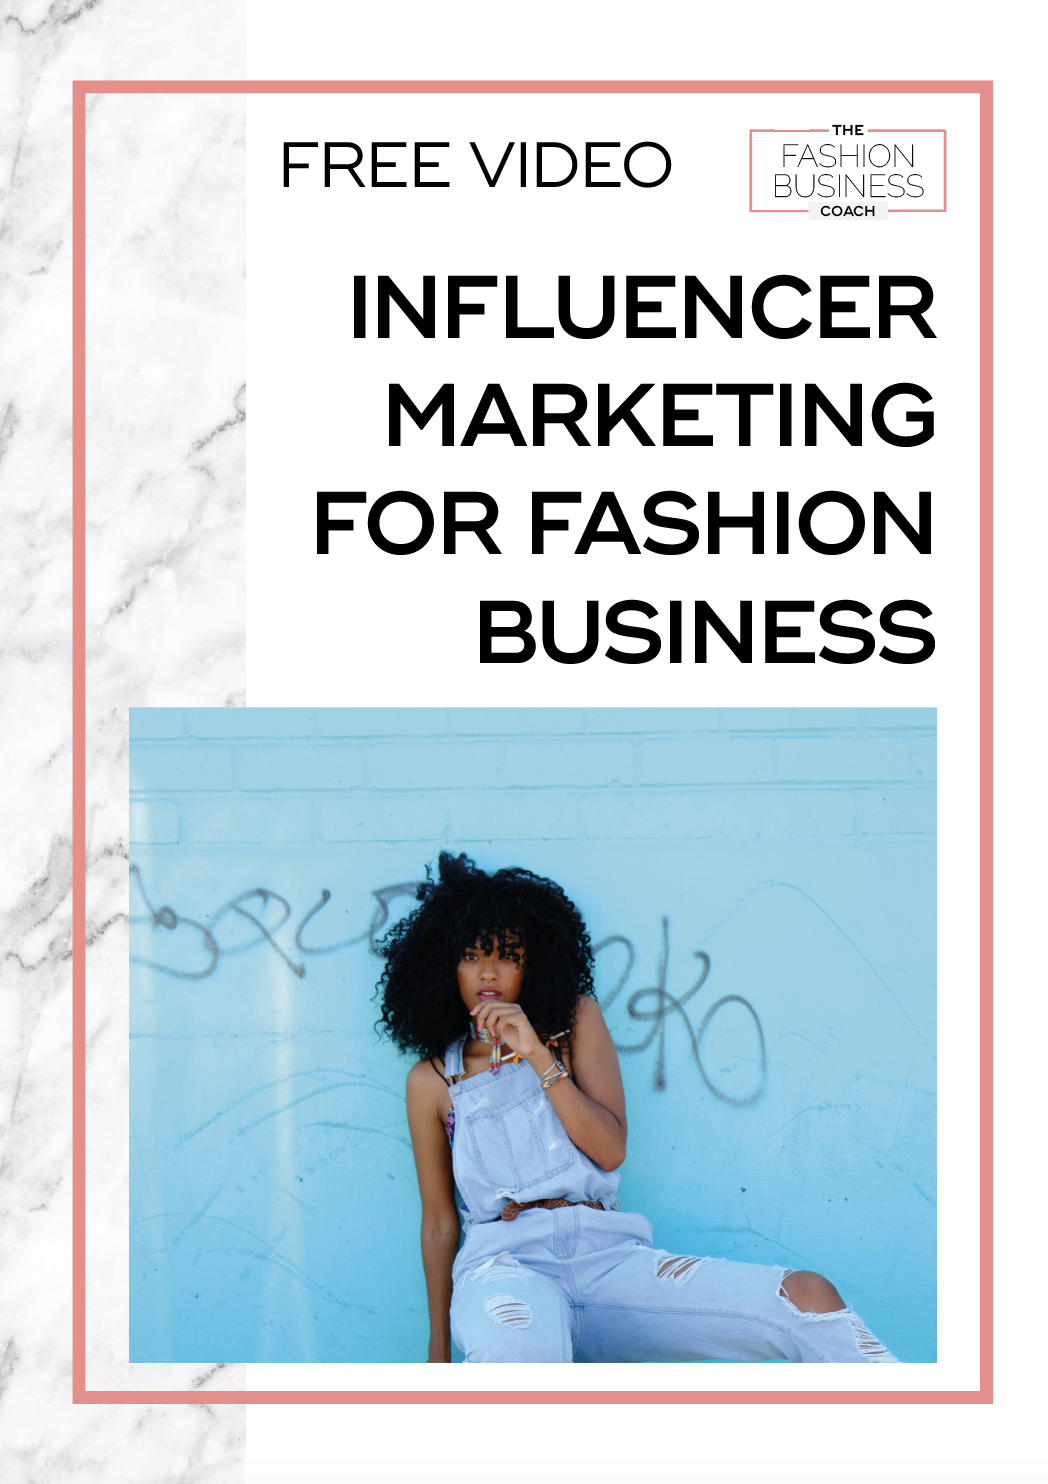 Influencer Marketing for Fashion Business 4.png